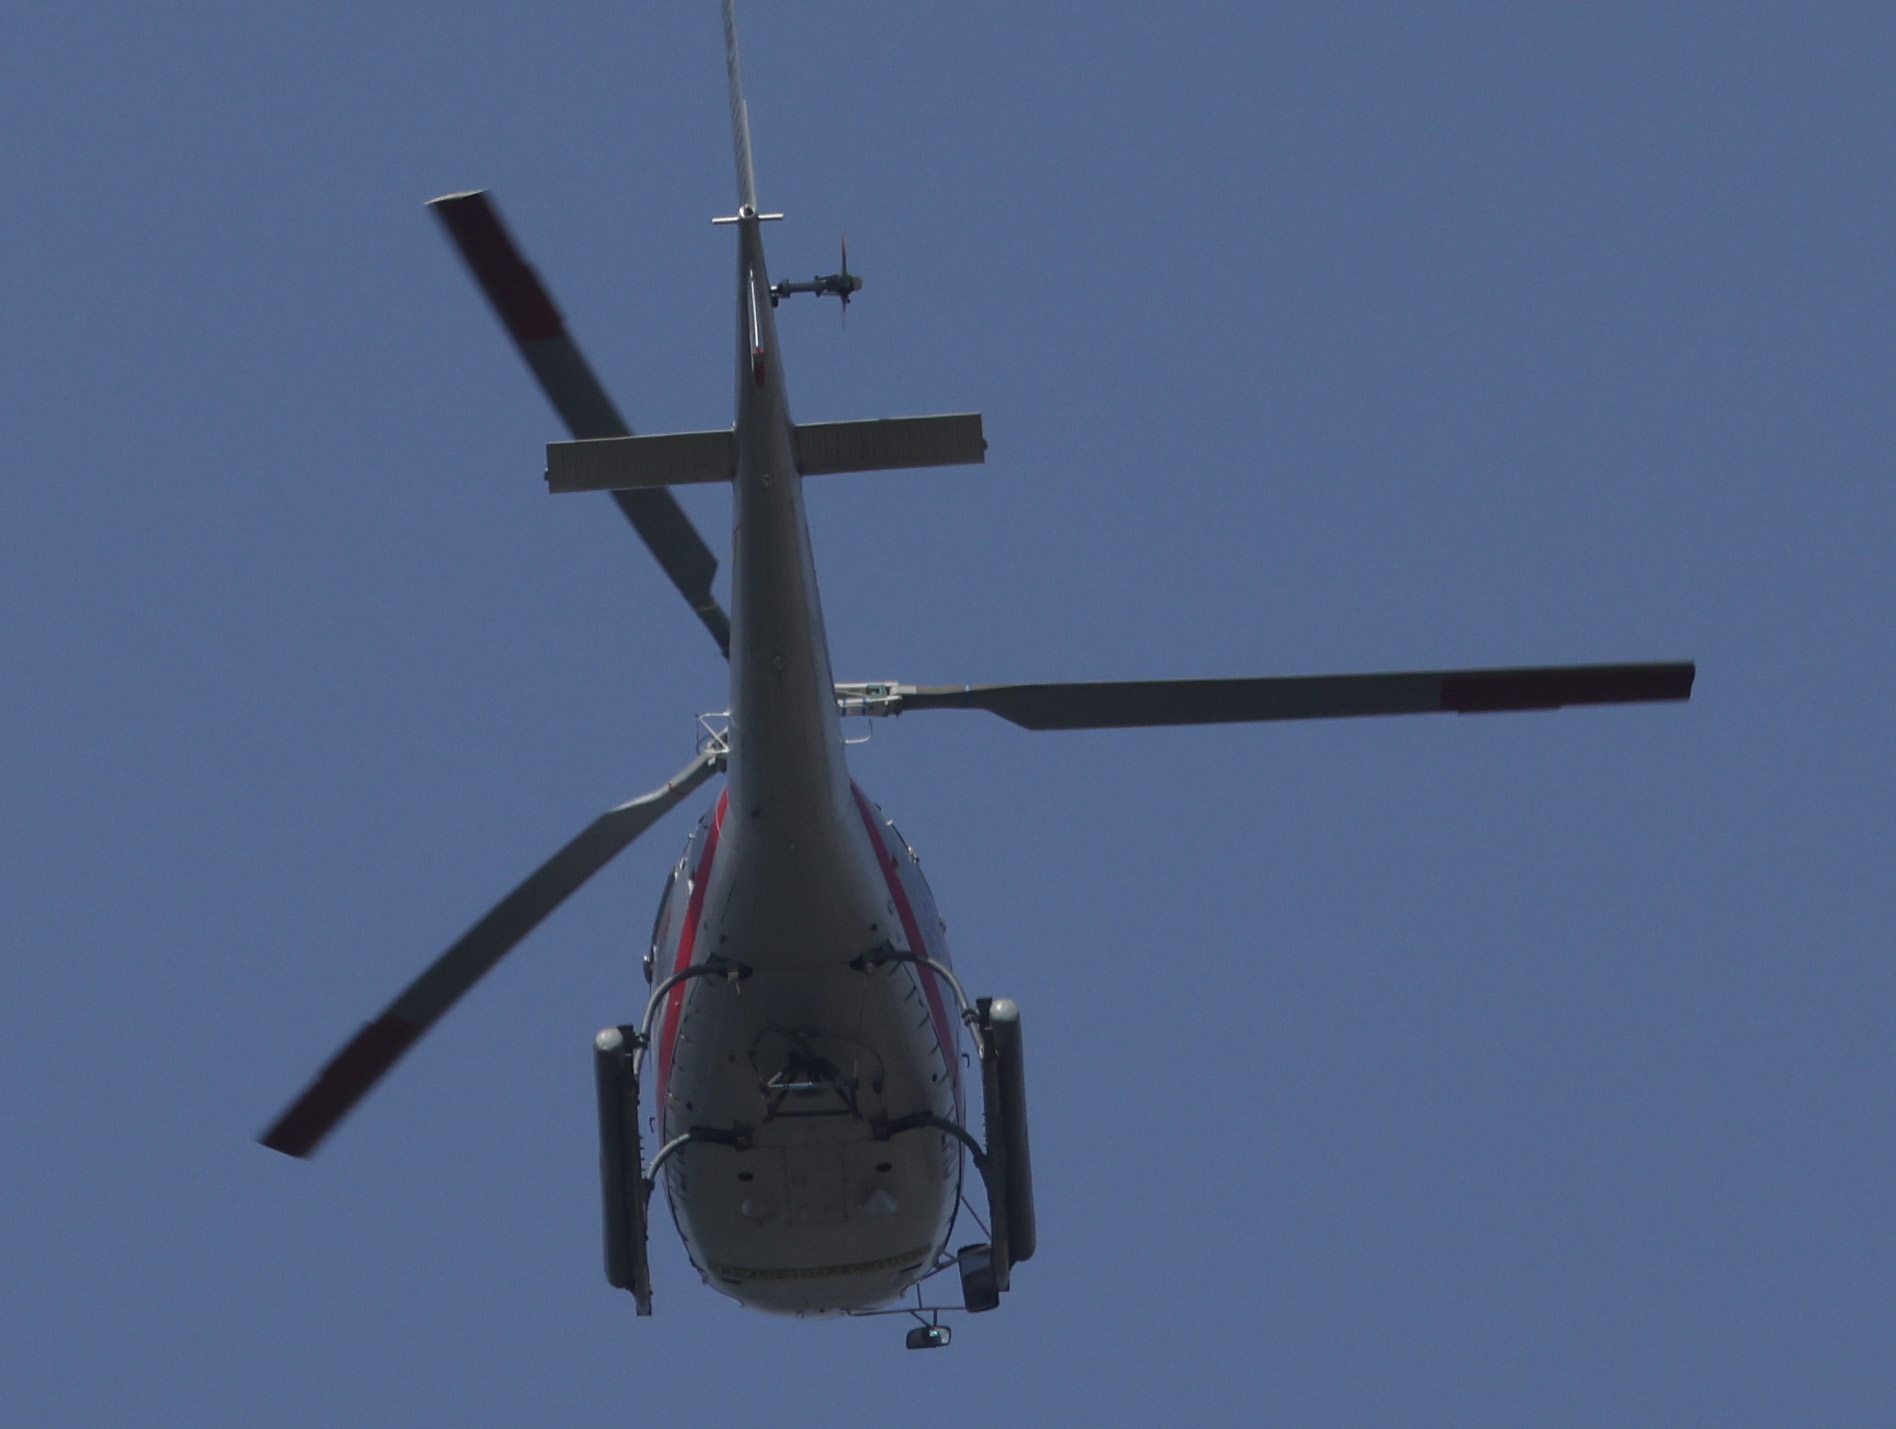 Helicopter with rolling shutter (detail)...